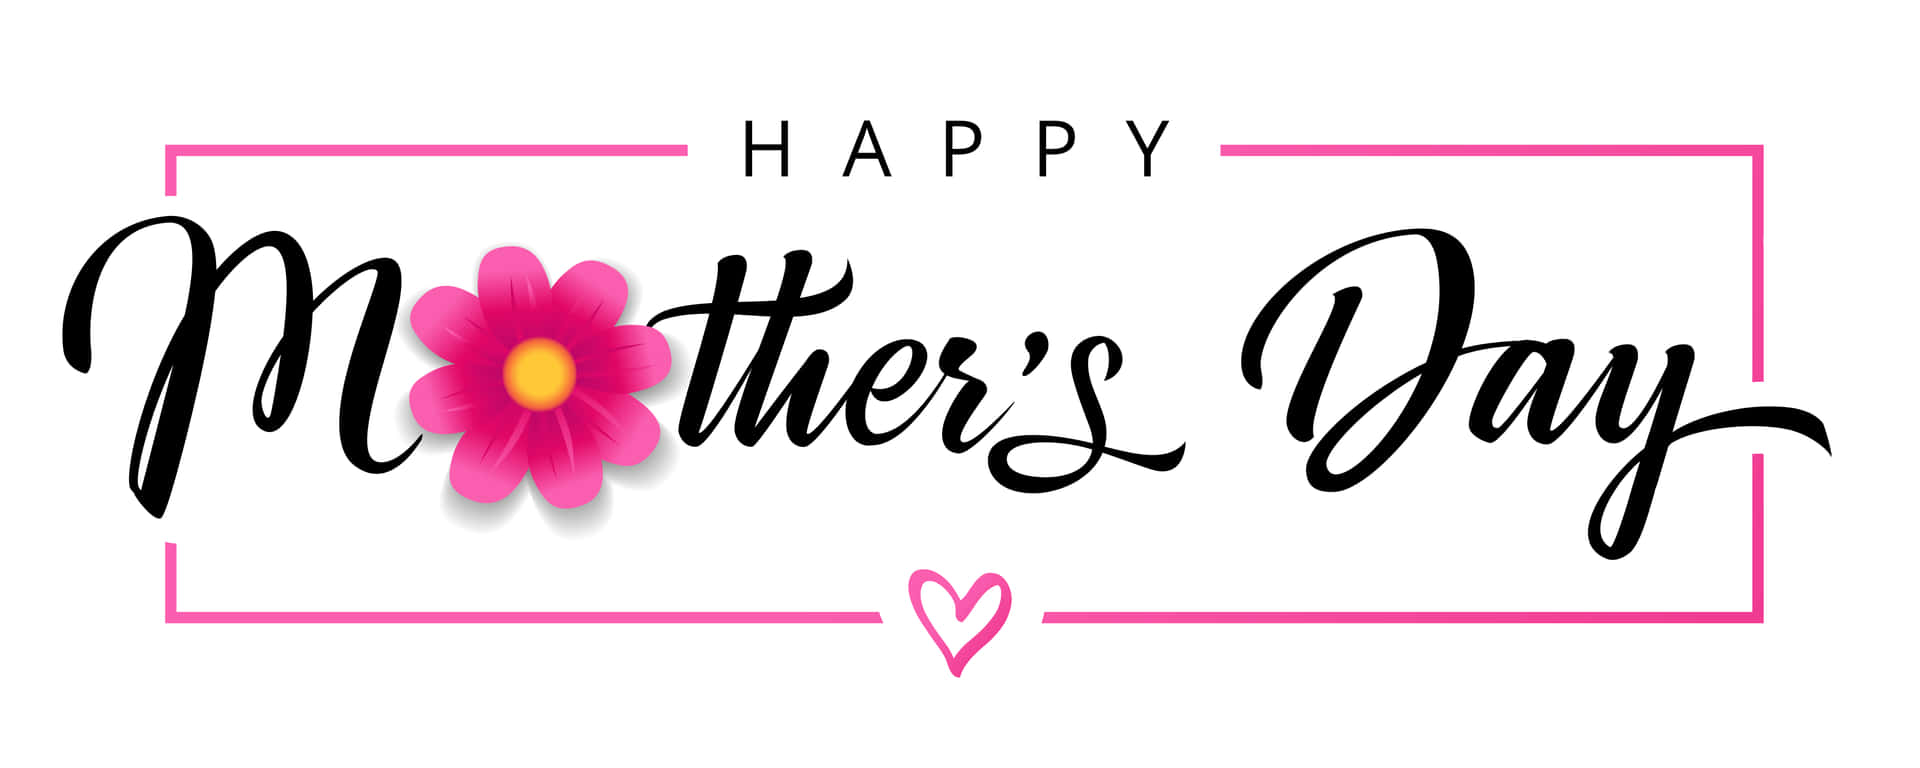 Download Happy Mothers Day! Celebrate the special women in your ...